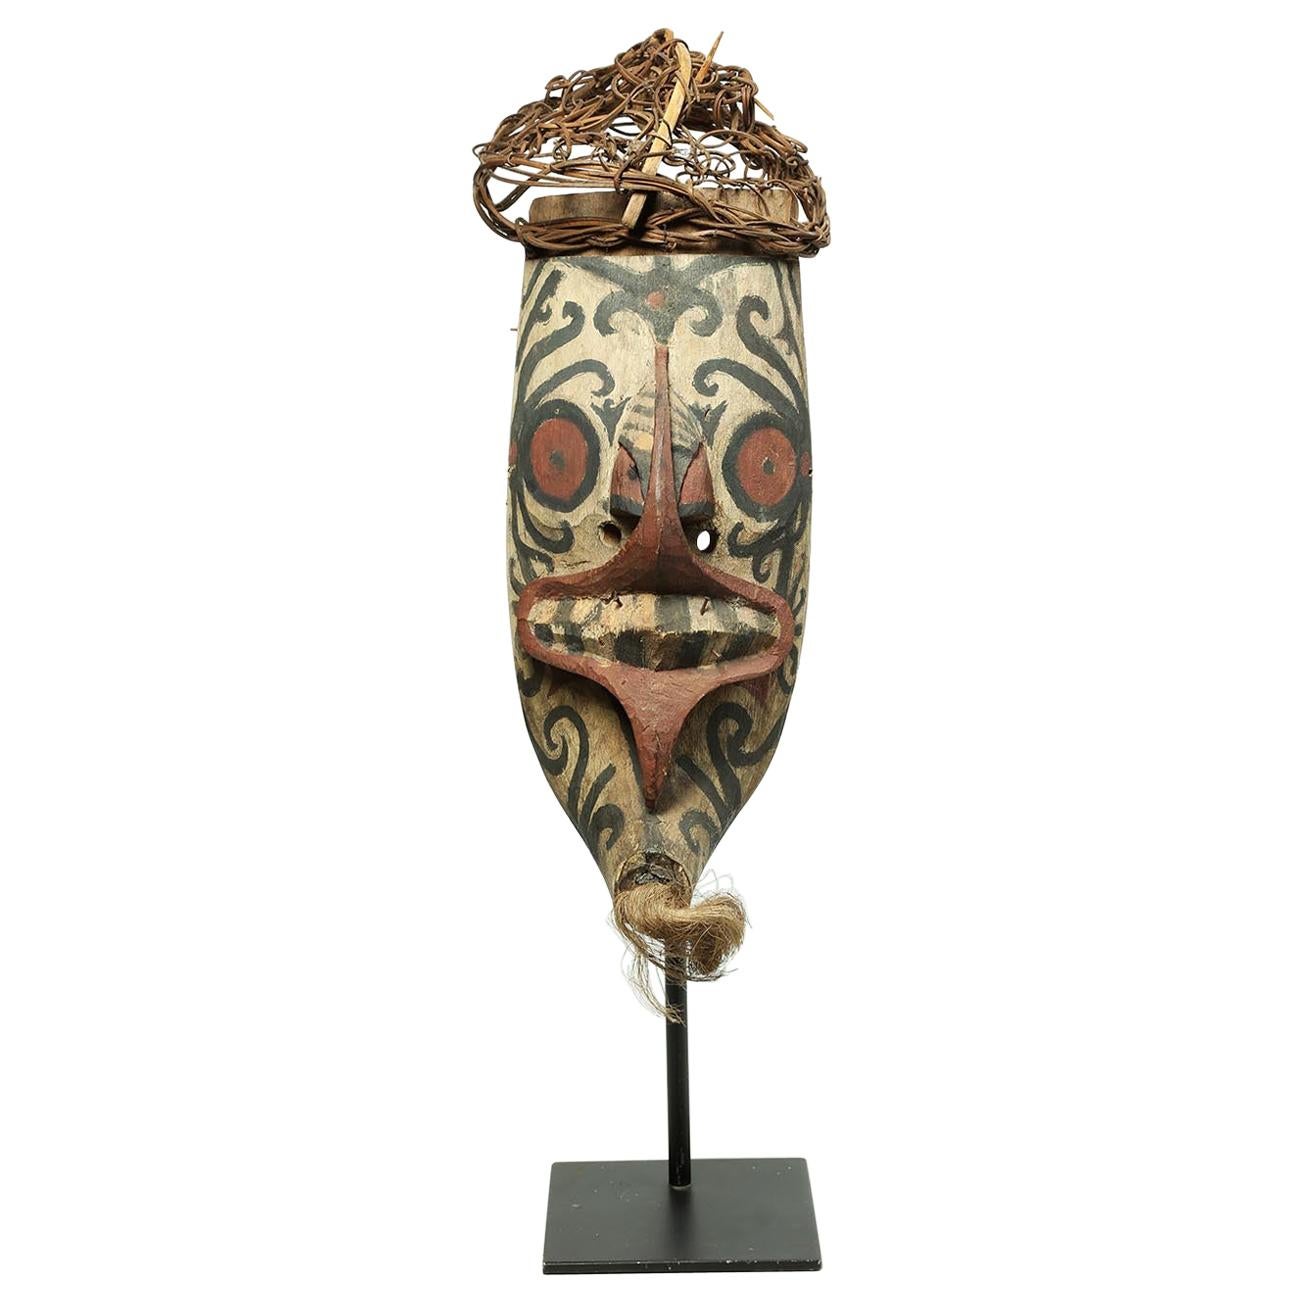 Tribal wood and pigment Borneo Dayak Hudoq mask on stand, Indonesia, early 20th century
Painted wood Dayak Hudoq tribally used mask with remains of black, red and white pigments. Part of headdress still attached, and fibers in chin, early 20th